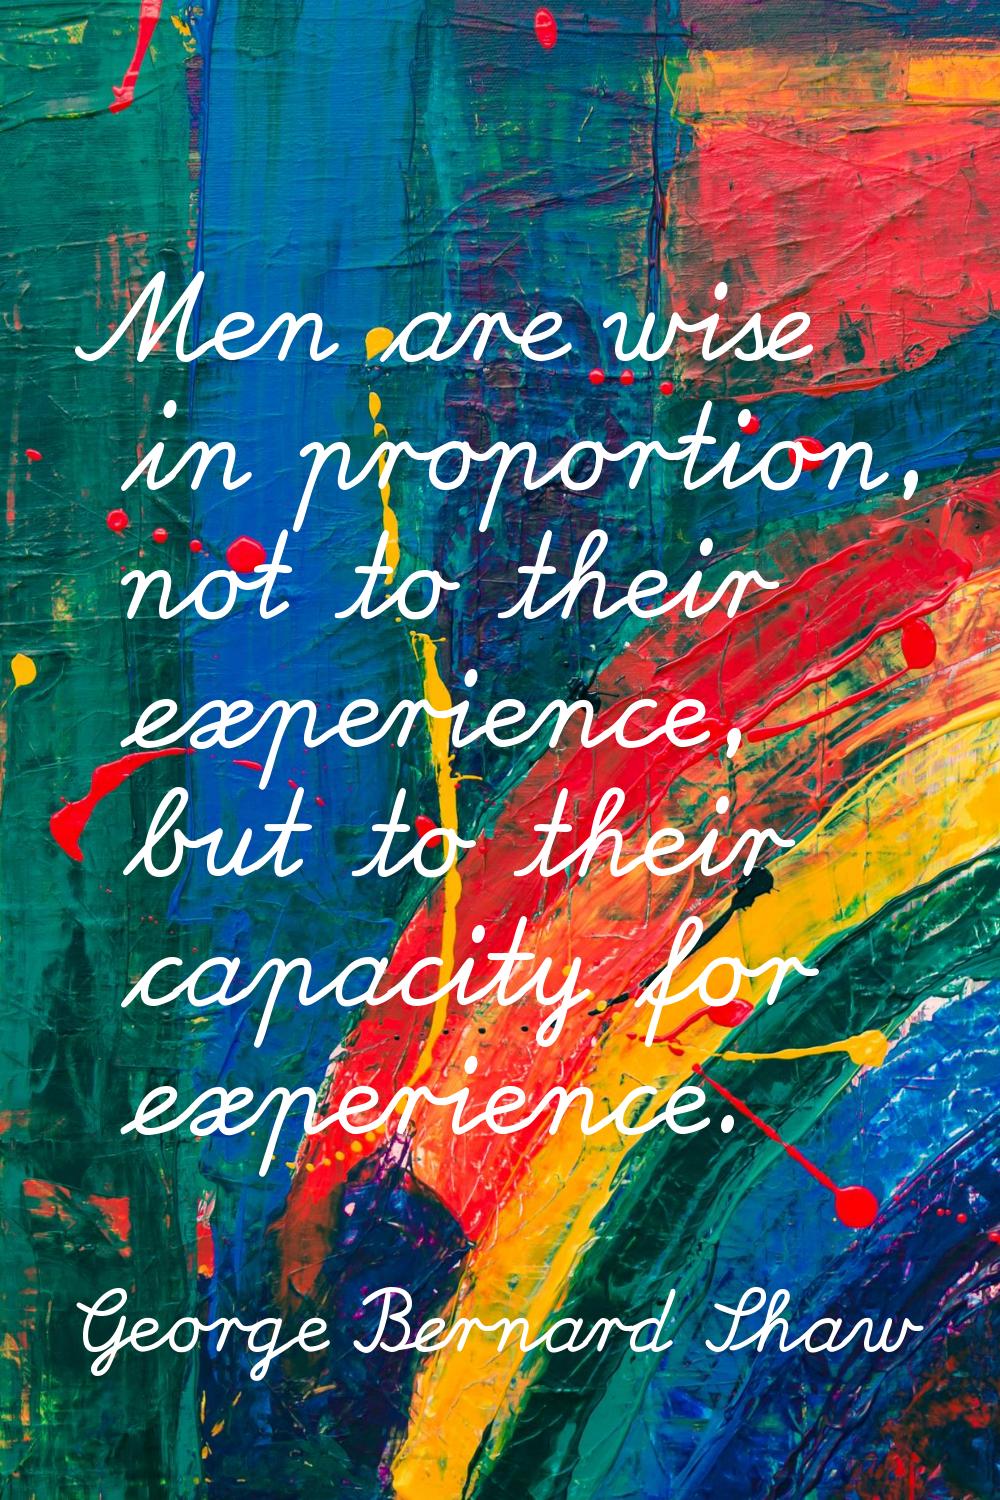 Men are wise in proportion, not to their experience, but to their capacity for experience.